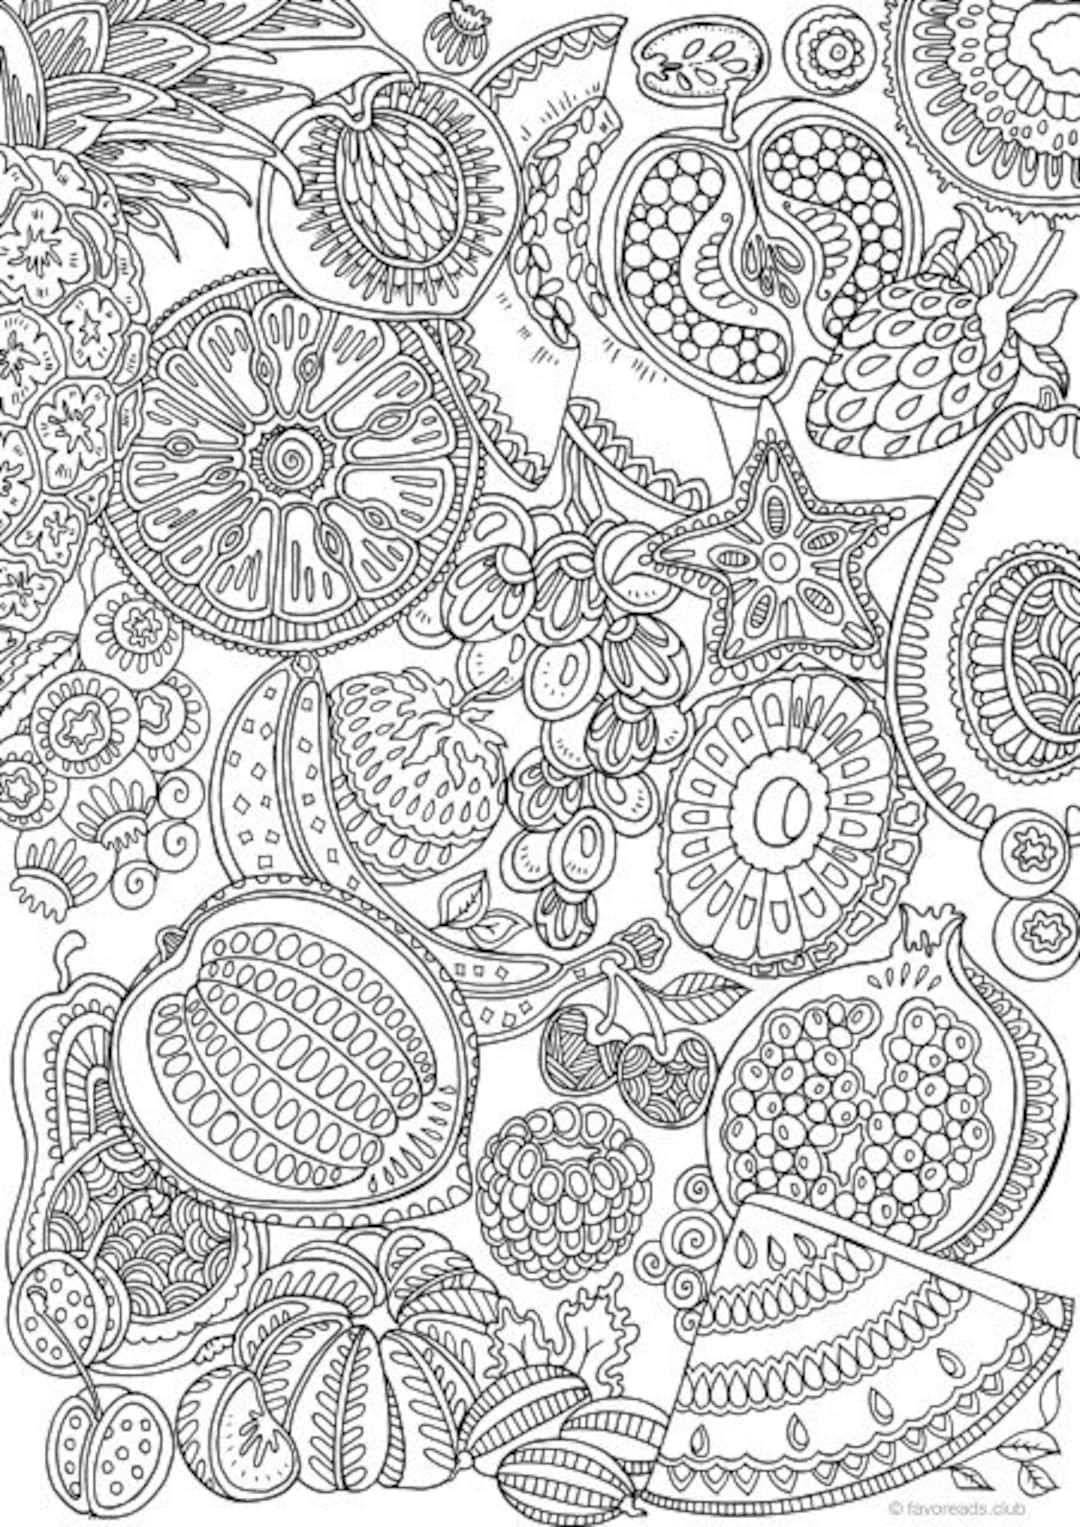 Keyhole Printable Adult Coloring Page From Favoreads Coloring Book Pages  for Adults and Kids Coloring Sheets Coloring Designs -  Canada